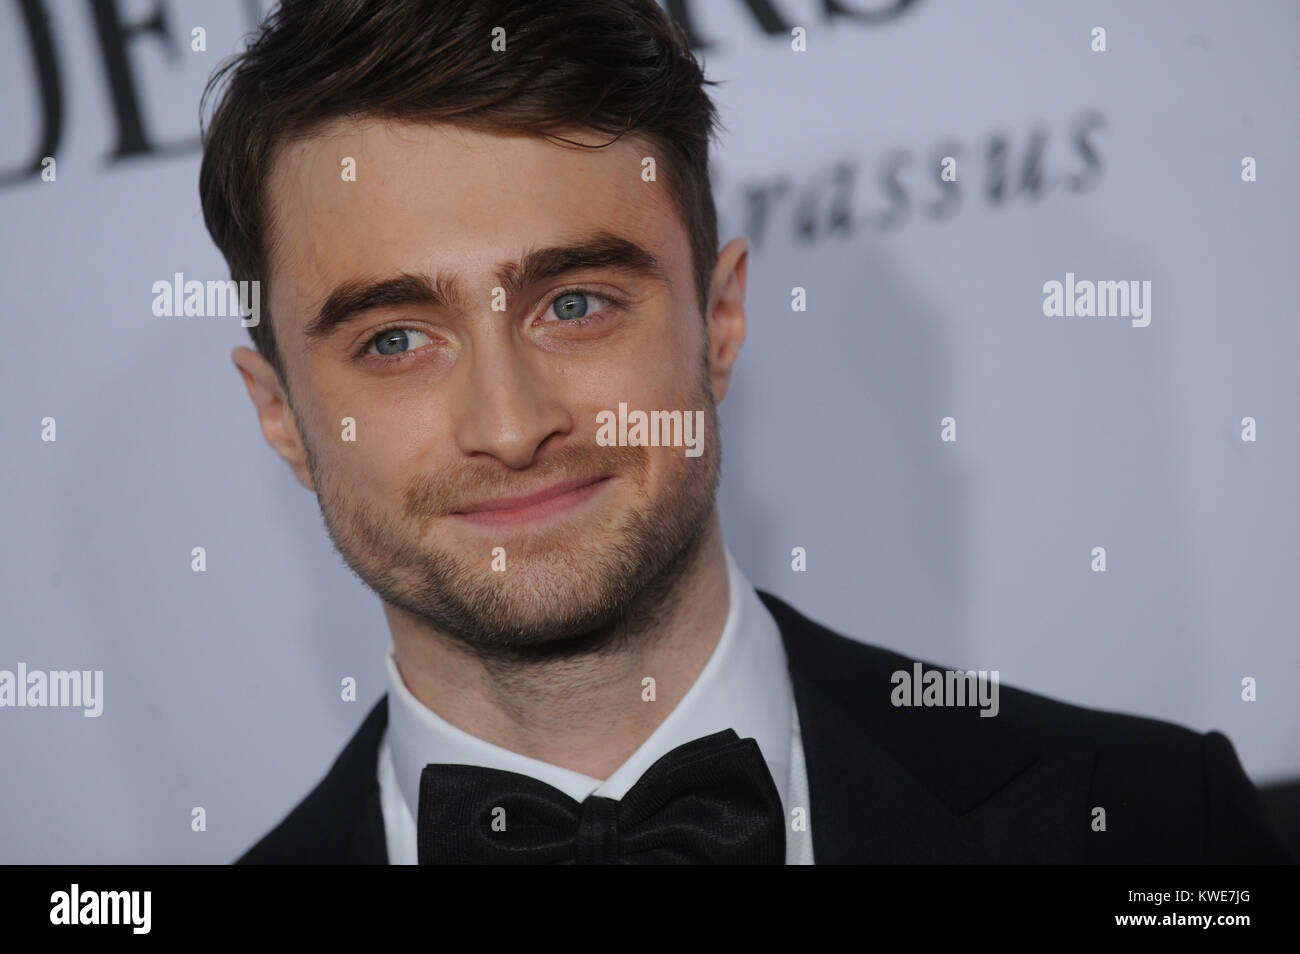 NEW YORK, NY - JUNE 08:  Daniel Radcliffe attends American Theatre Wing's 68th Annual Tony Awards at Radio City Music Hall on June 8, 2014 in New York City.   People:  Daniel Radcliffe Stock Photo